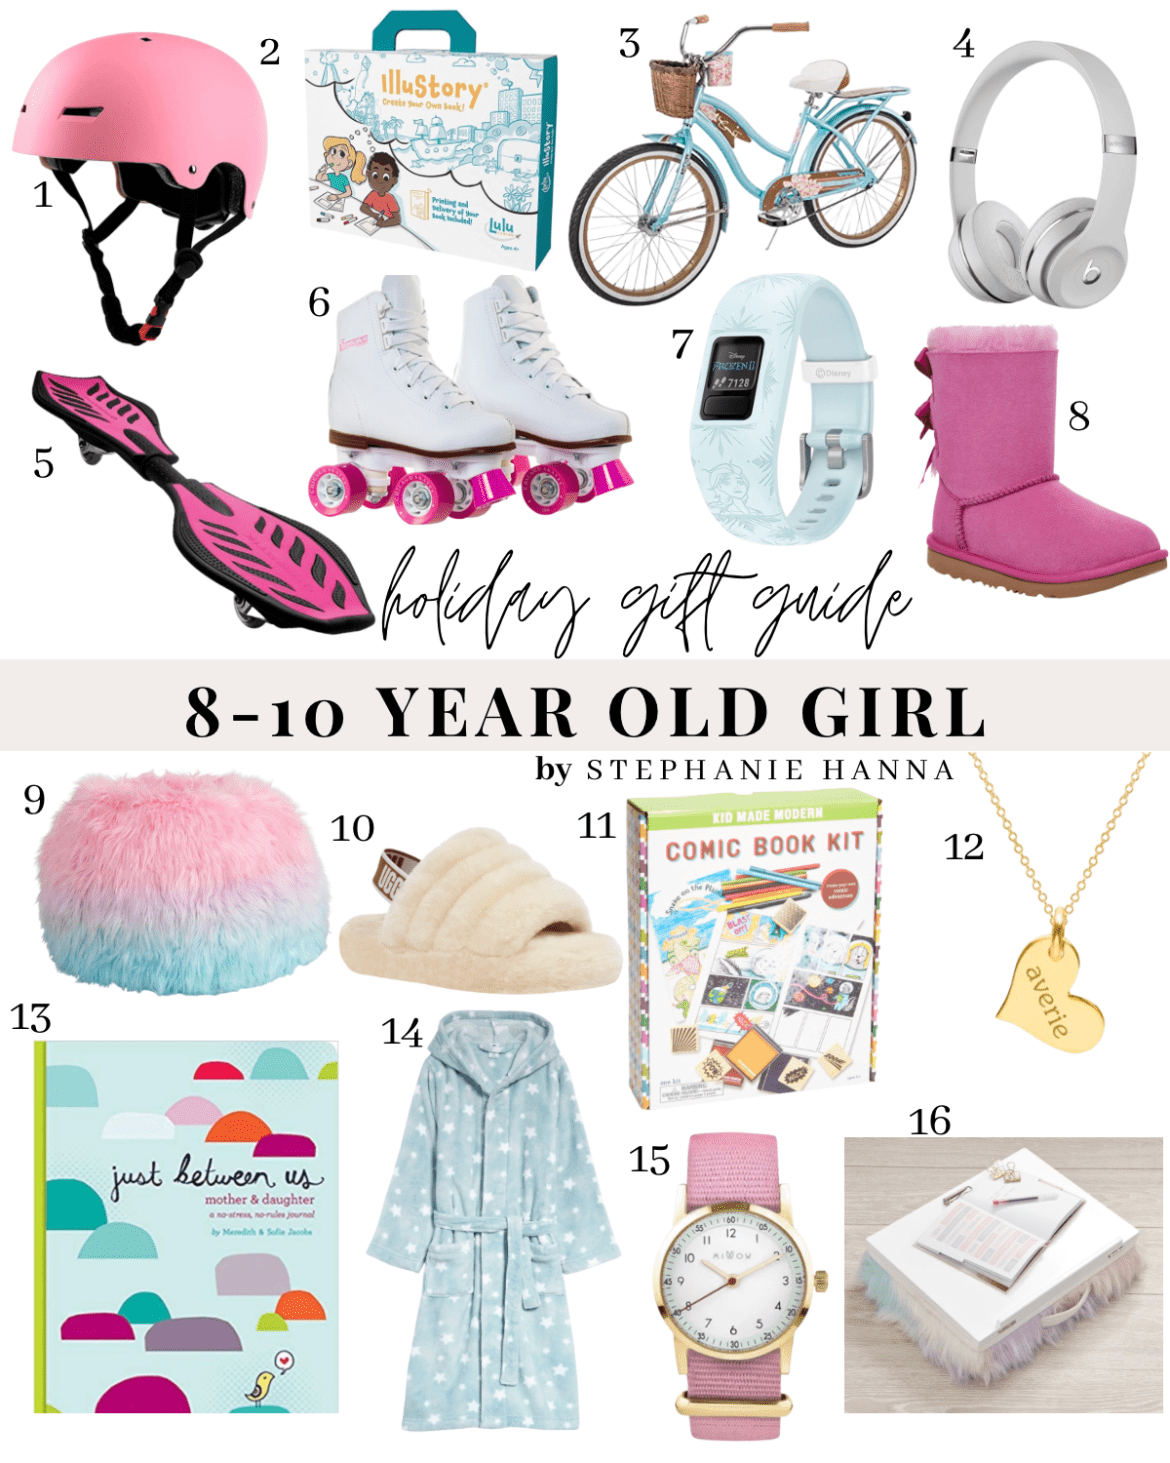 8-10 year old gift guide